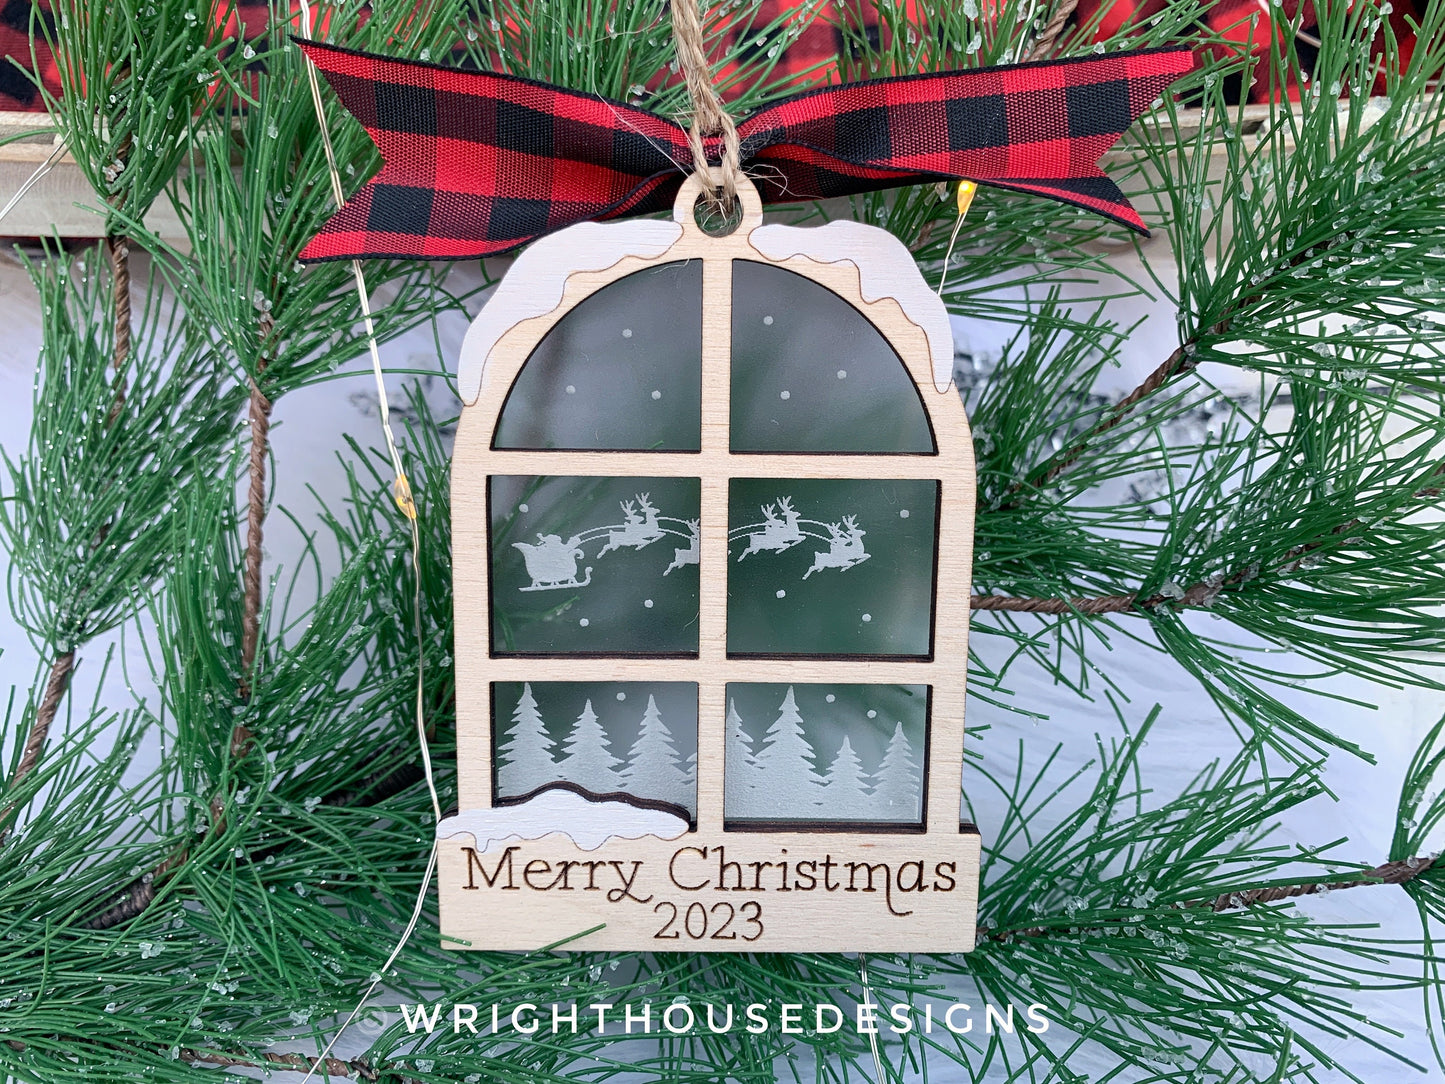 Santa Sleigh Snowy Winter Woodland Scene Ornament - Engraved Personalized Christmas Tree Ornament - Layered Wood and Acrylic Window Ornament